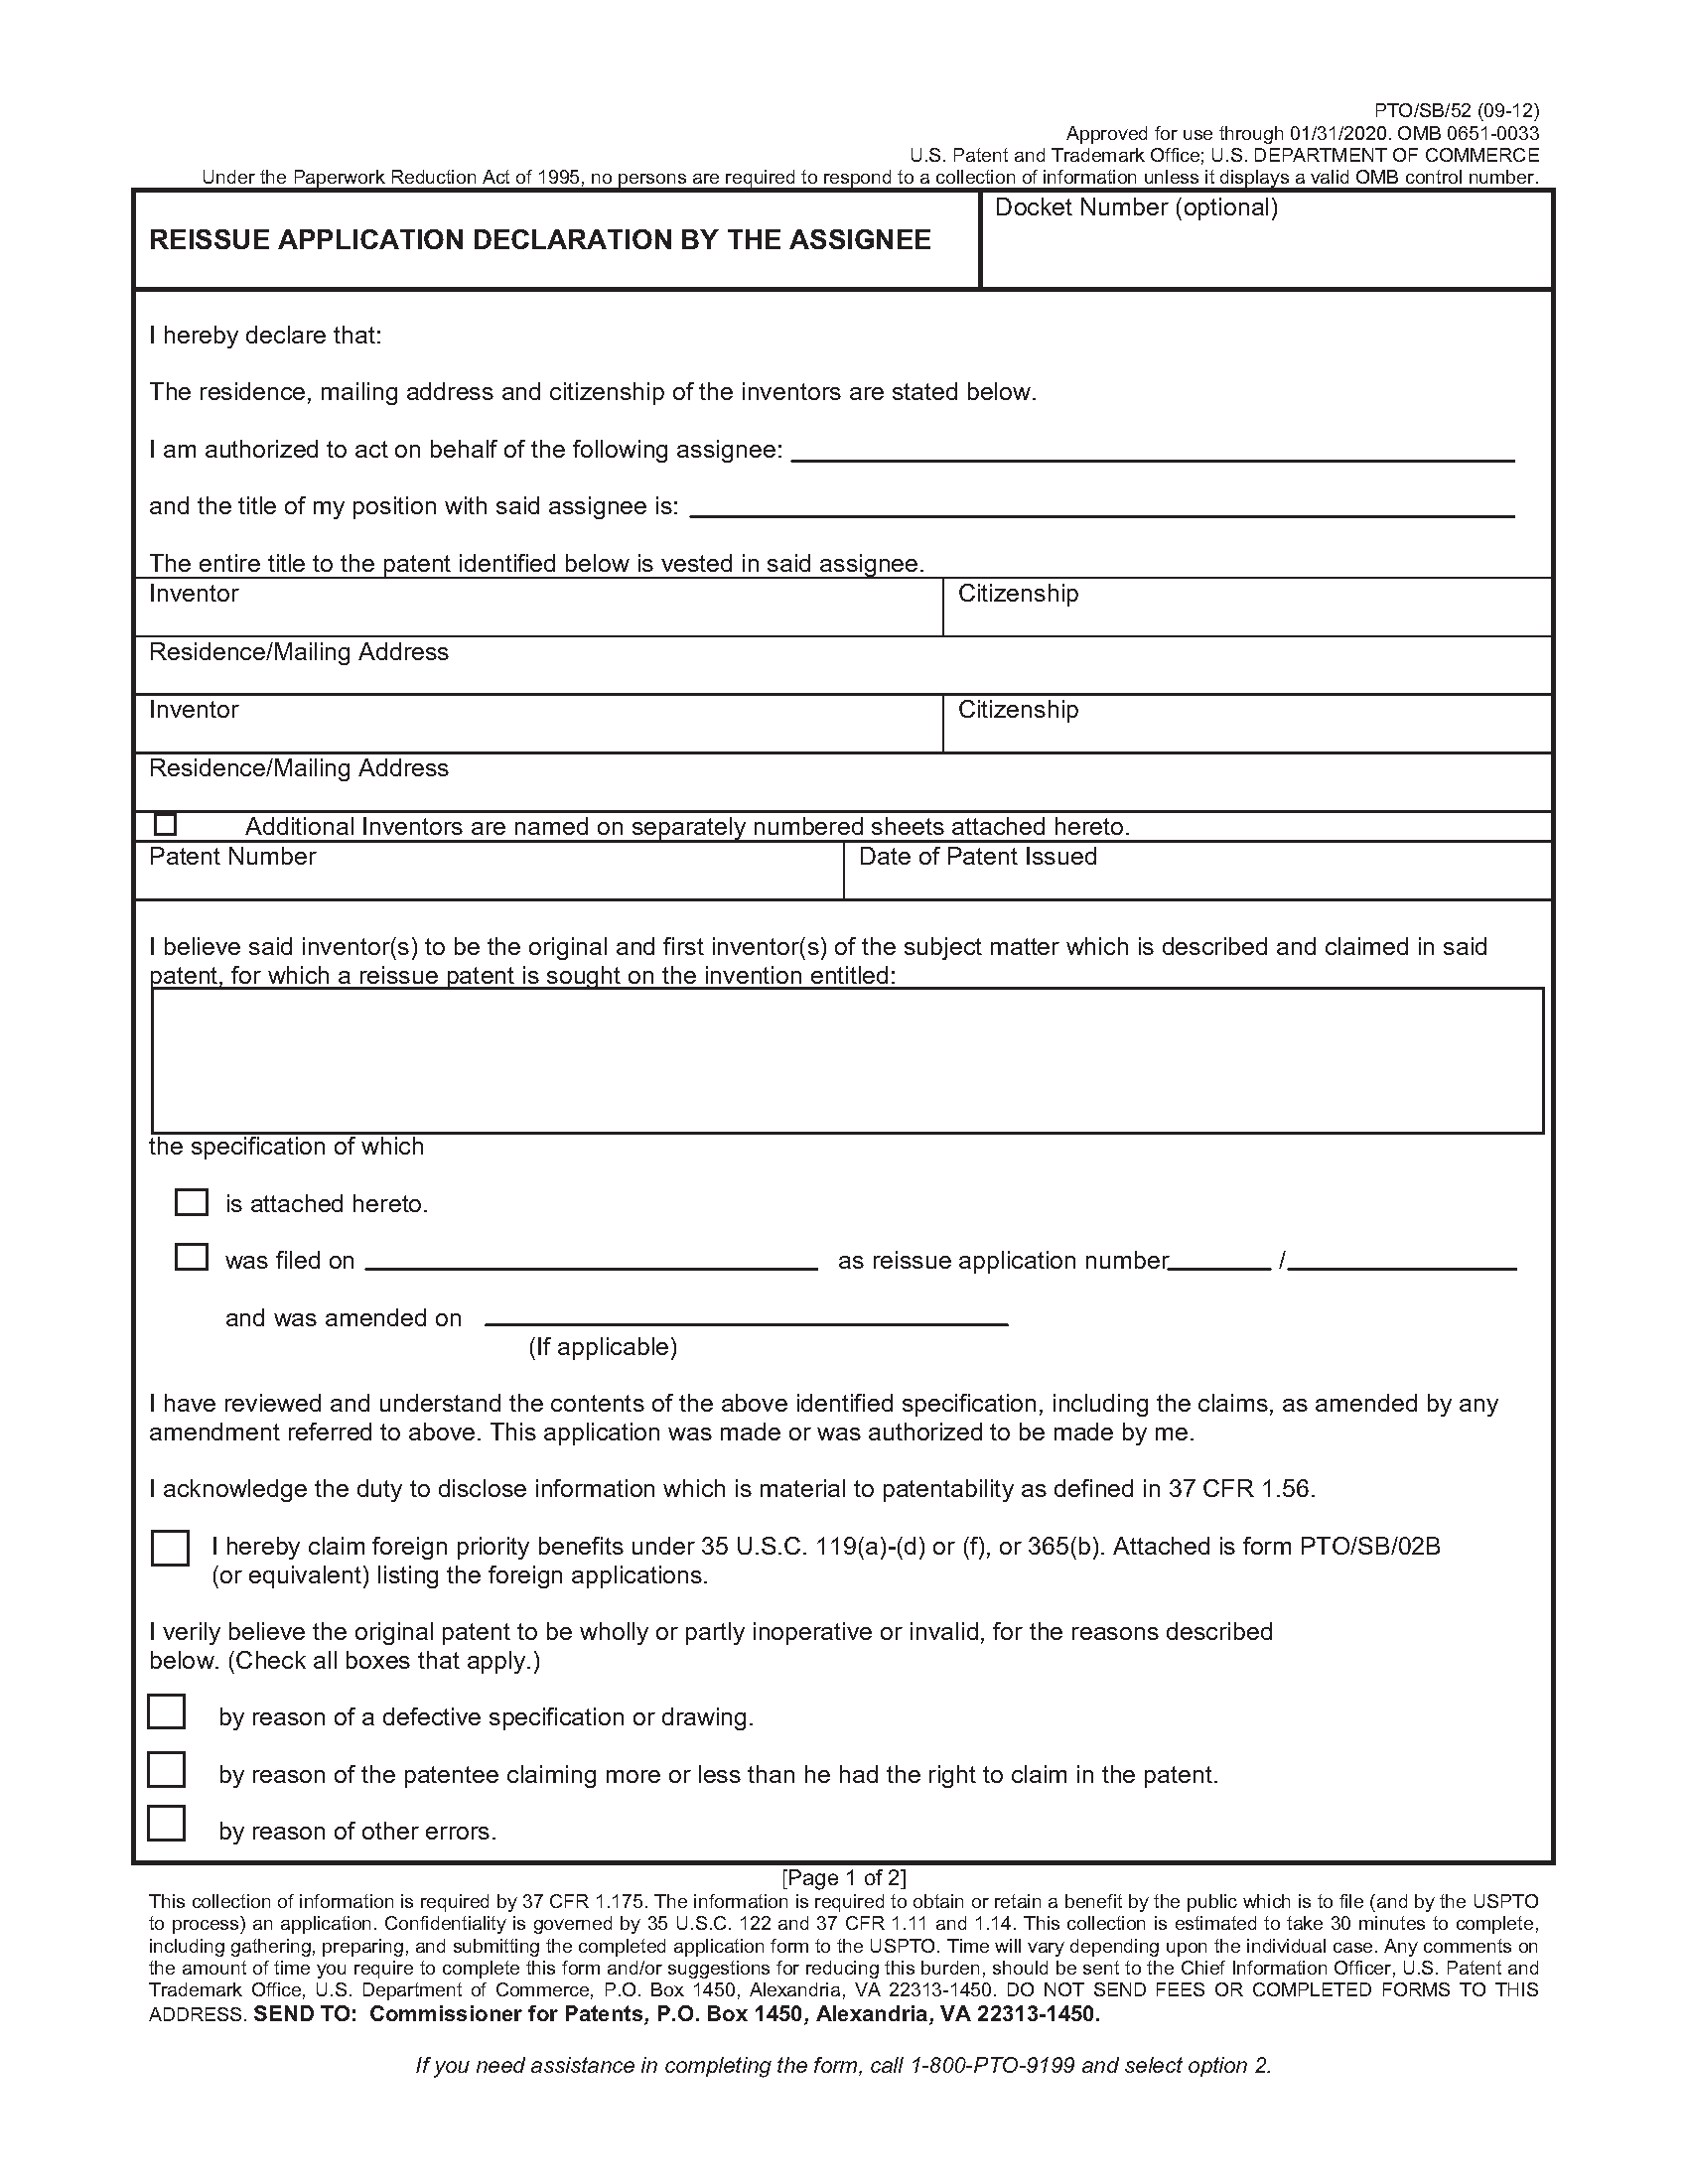 Reissue Application Declaration by the Assignee Page 1